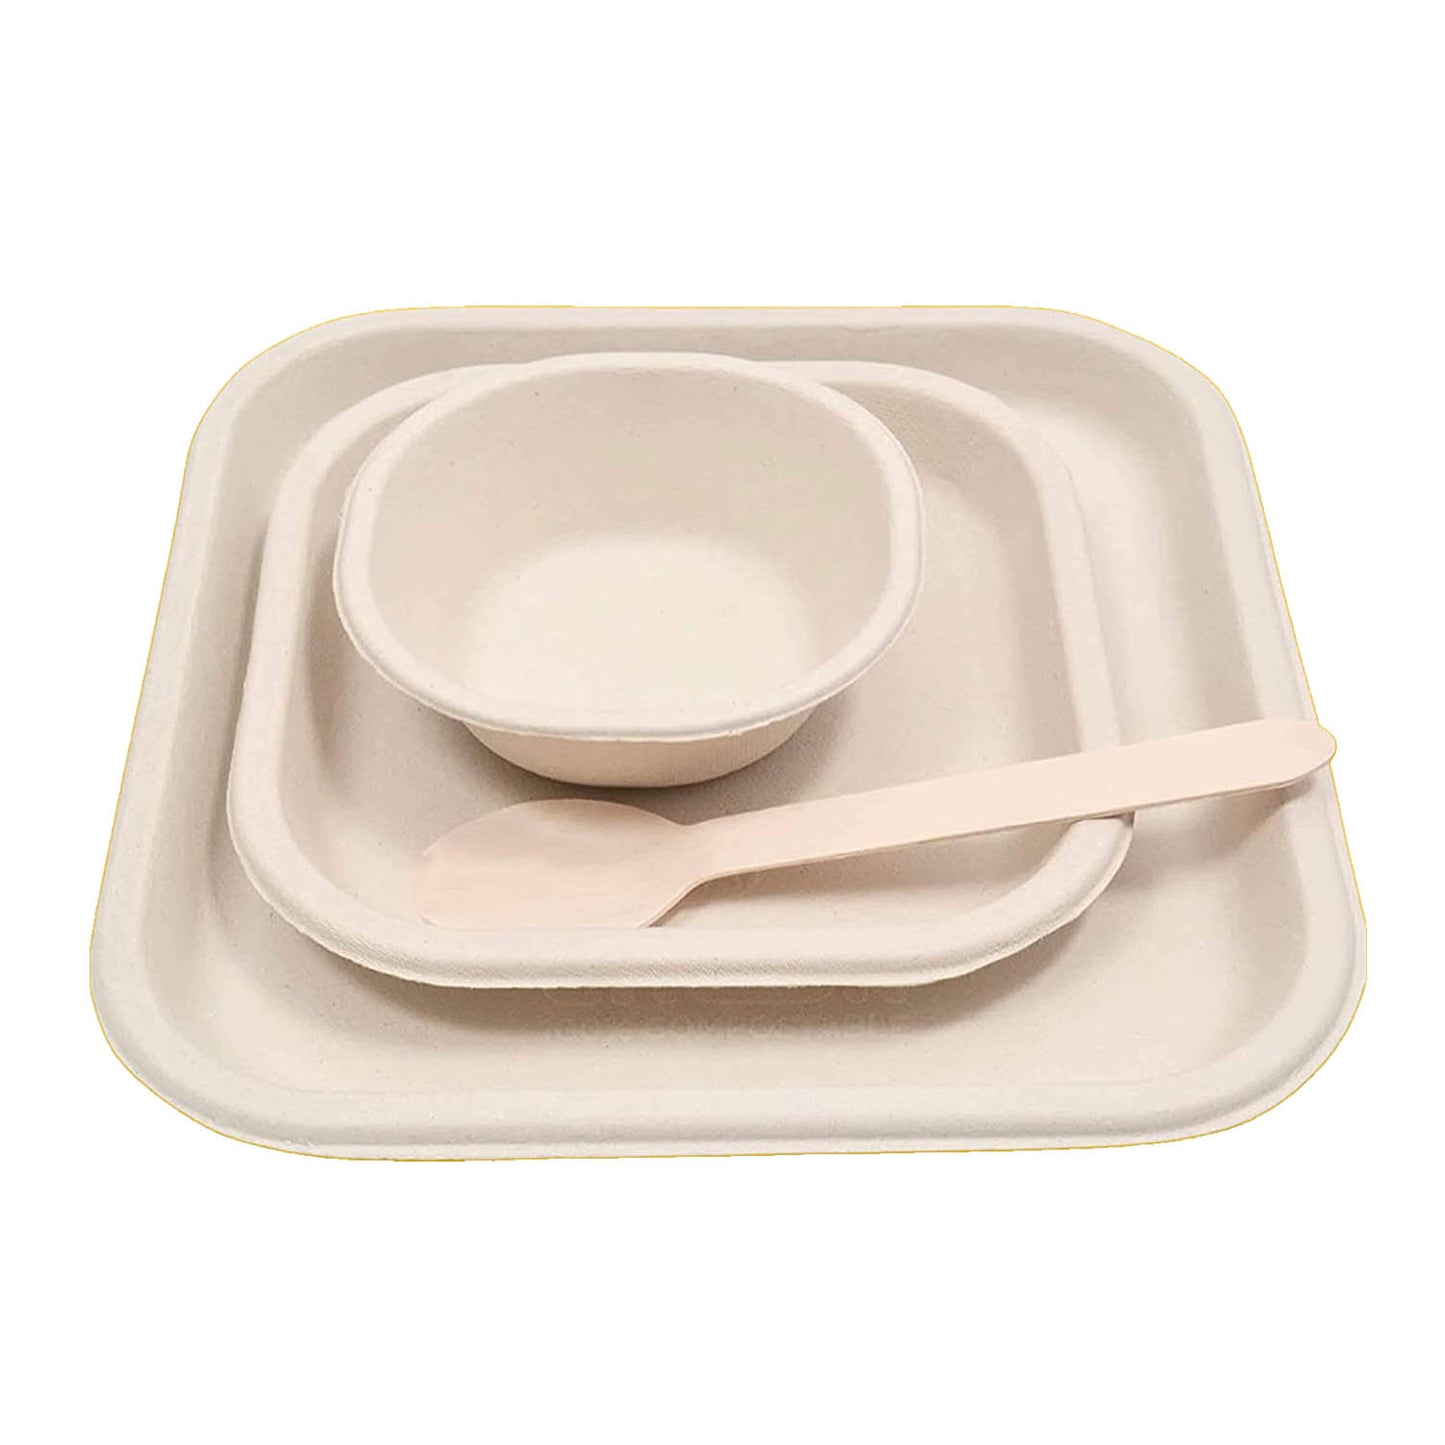 6-Inch Square Paper Plates Bagasse Sugarcane Plates - 50-Pack